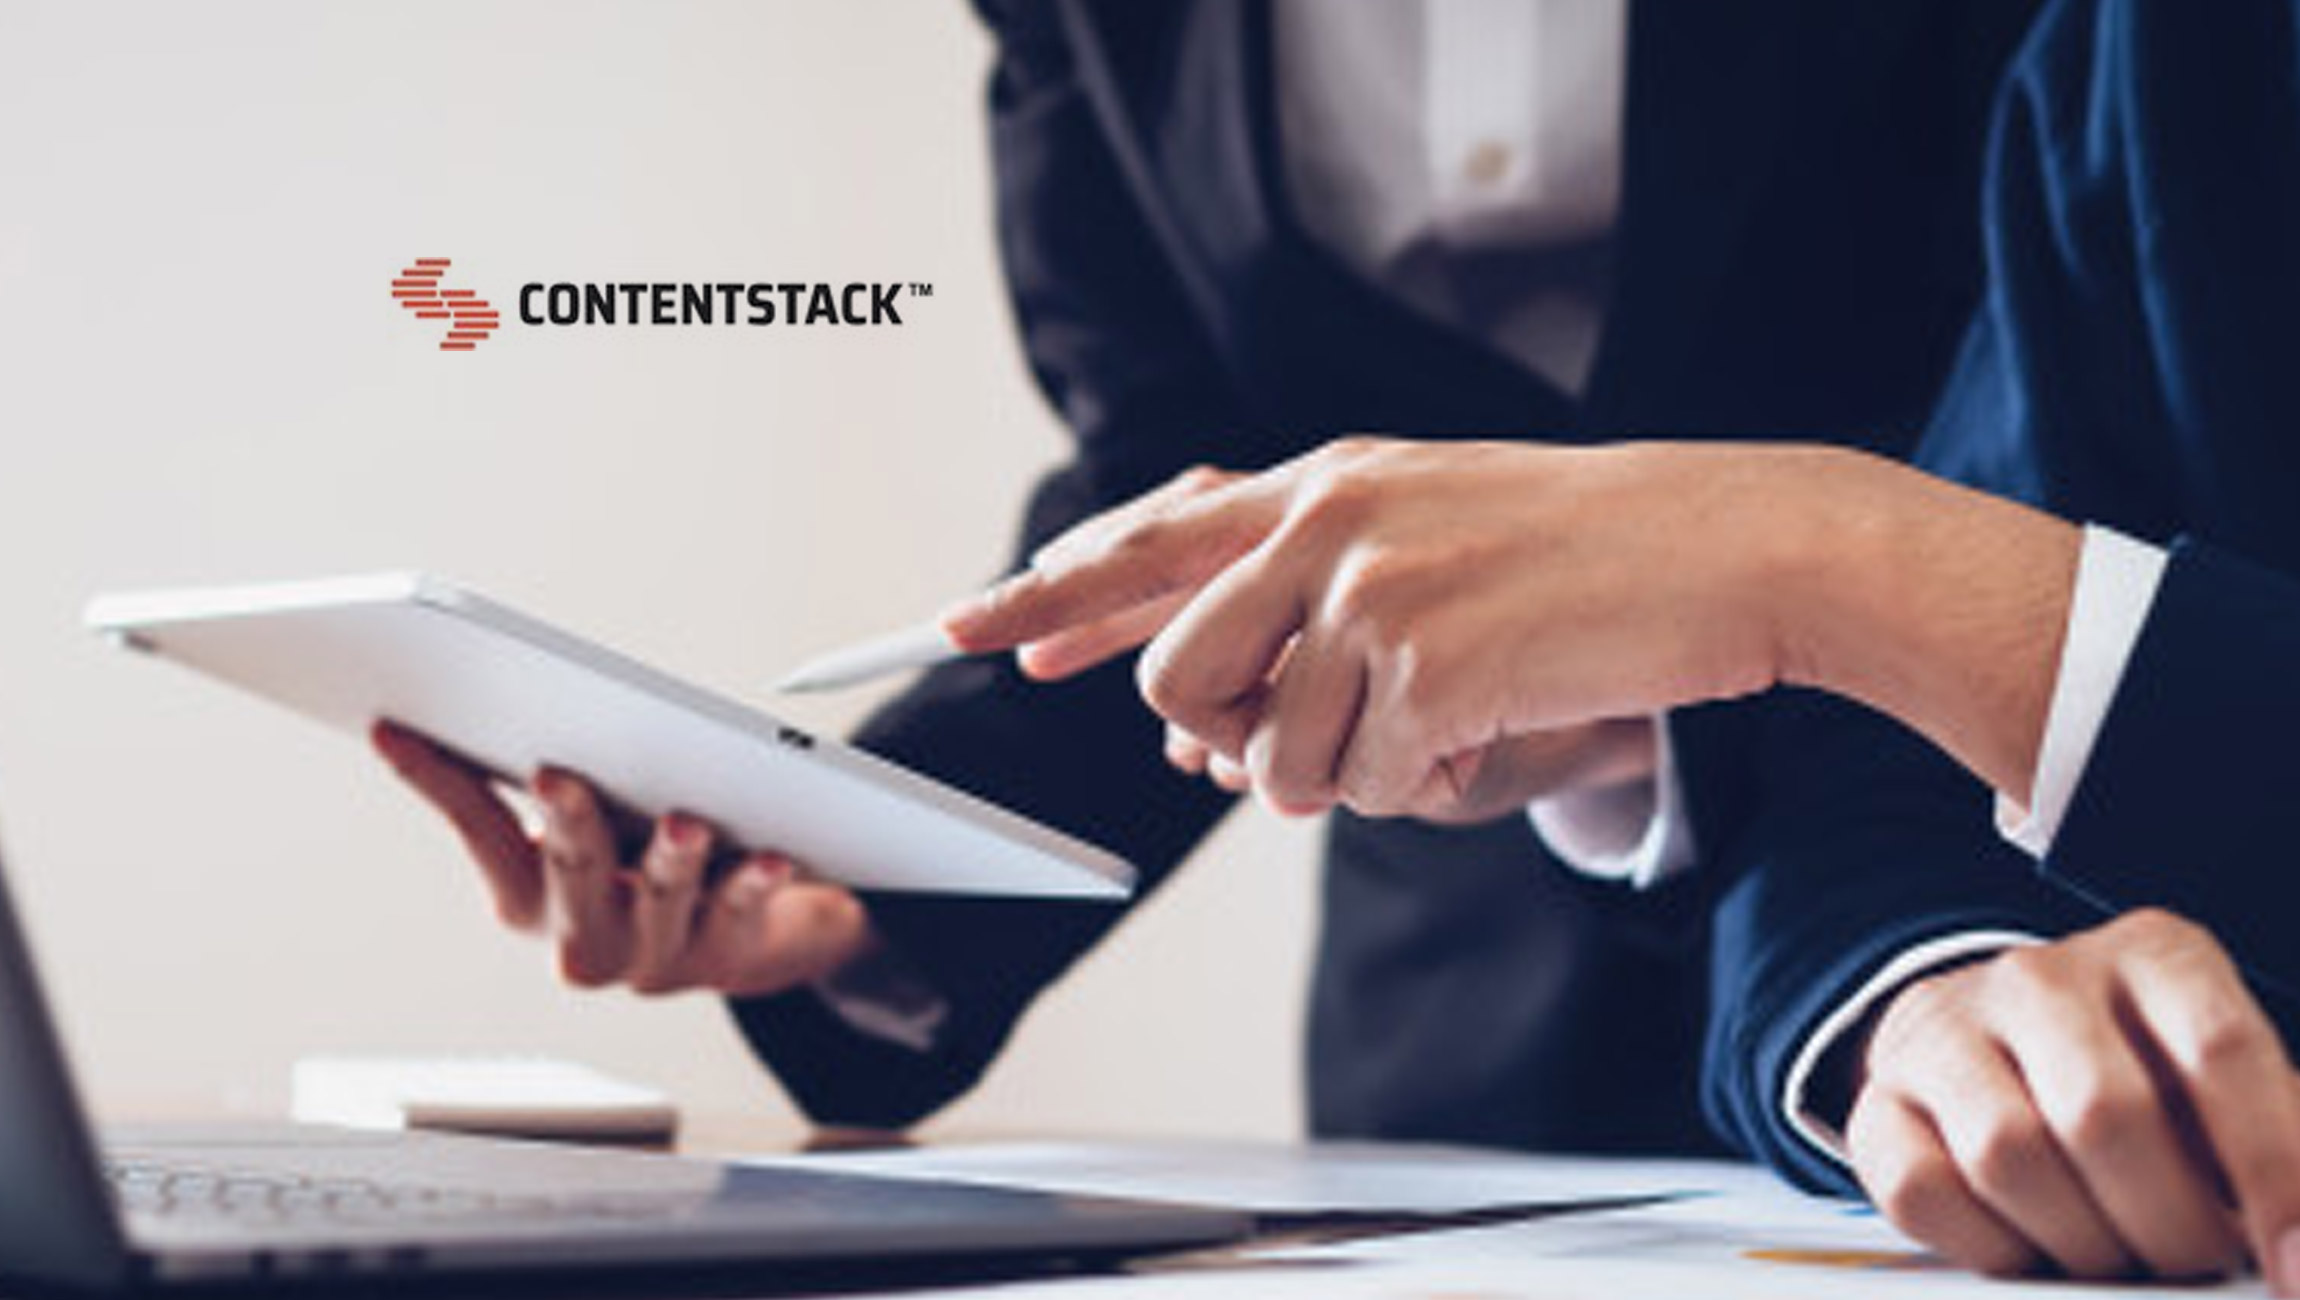 Contentstack Expands Leadership Team with Key Hires in Sales and Marketing to Scale for Rapid Growth of a Digital-First World